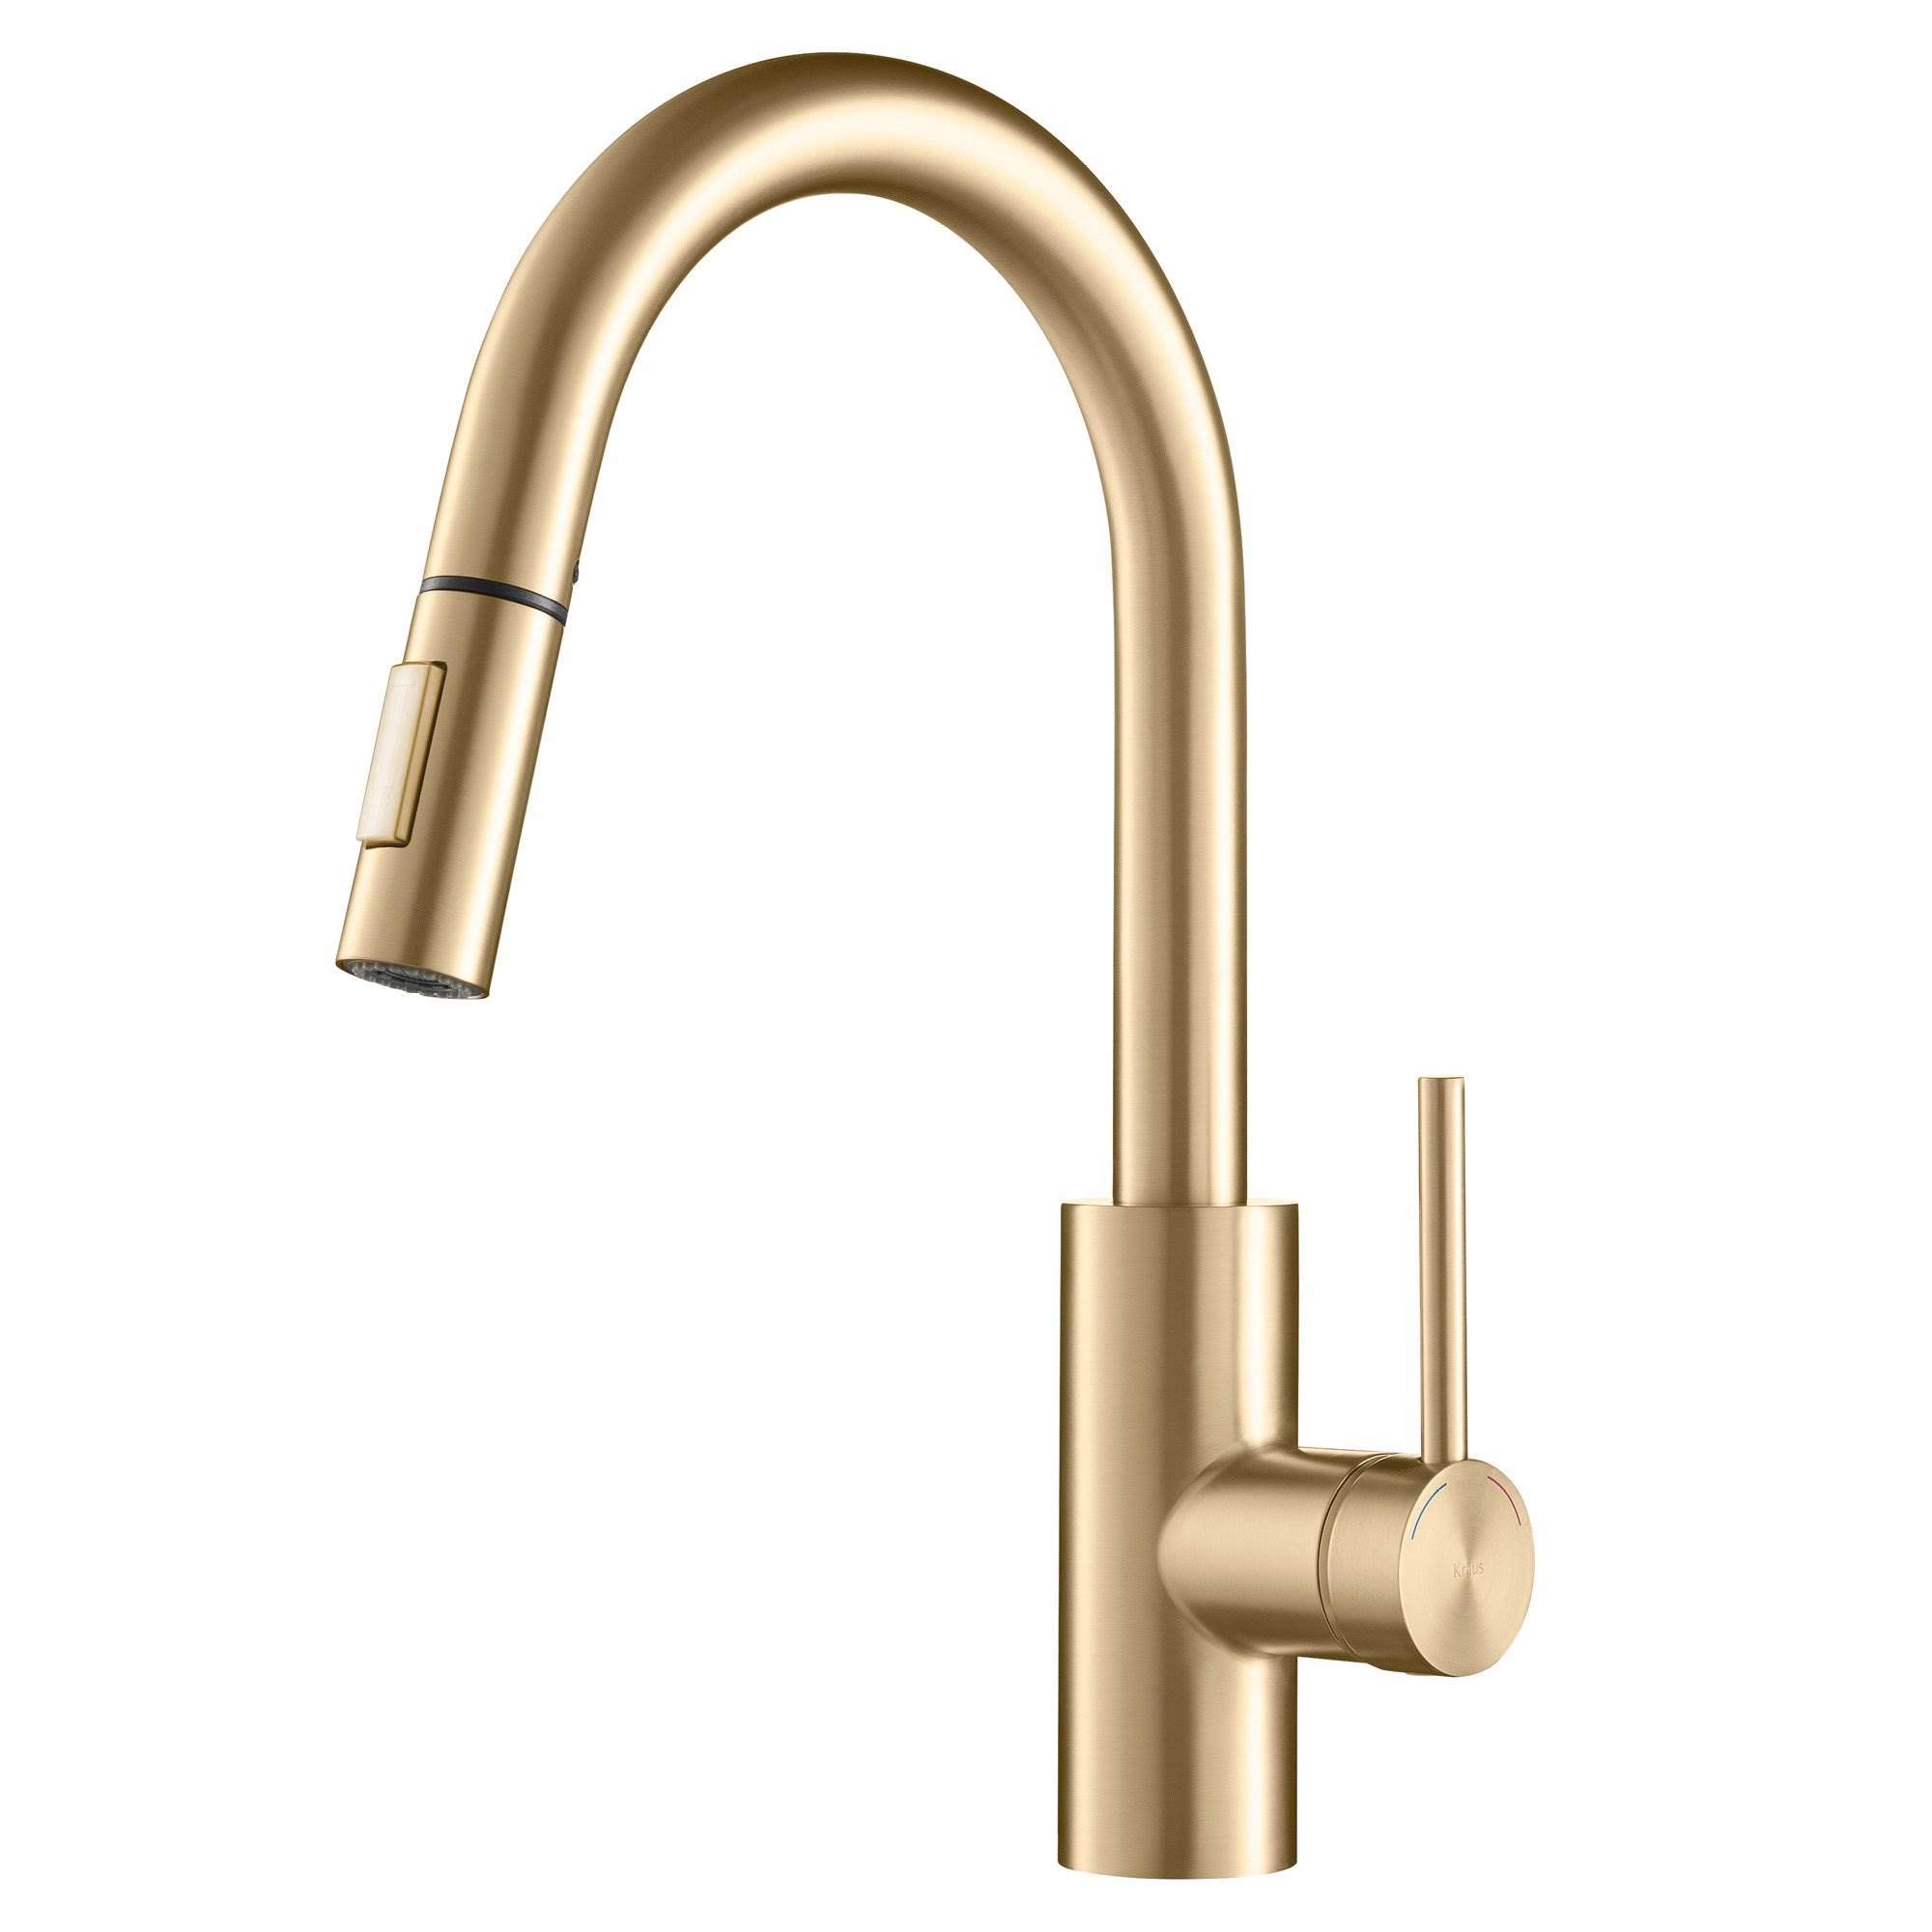 Kraus KPF-2620BB Oletto Kitchen Faucet, 15 1/8 Inch, Brushed Brass